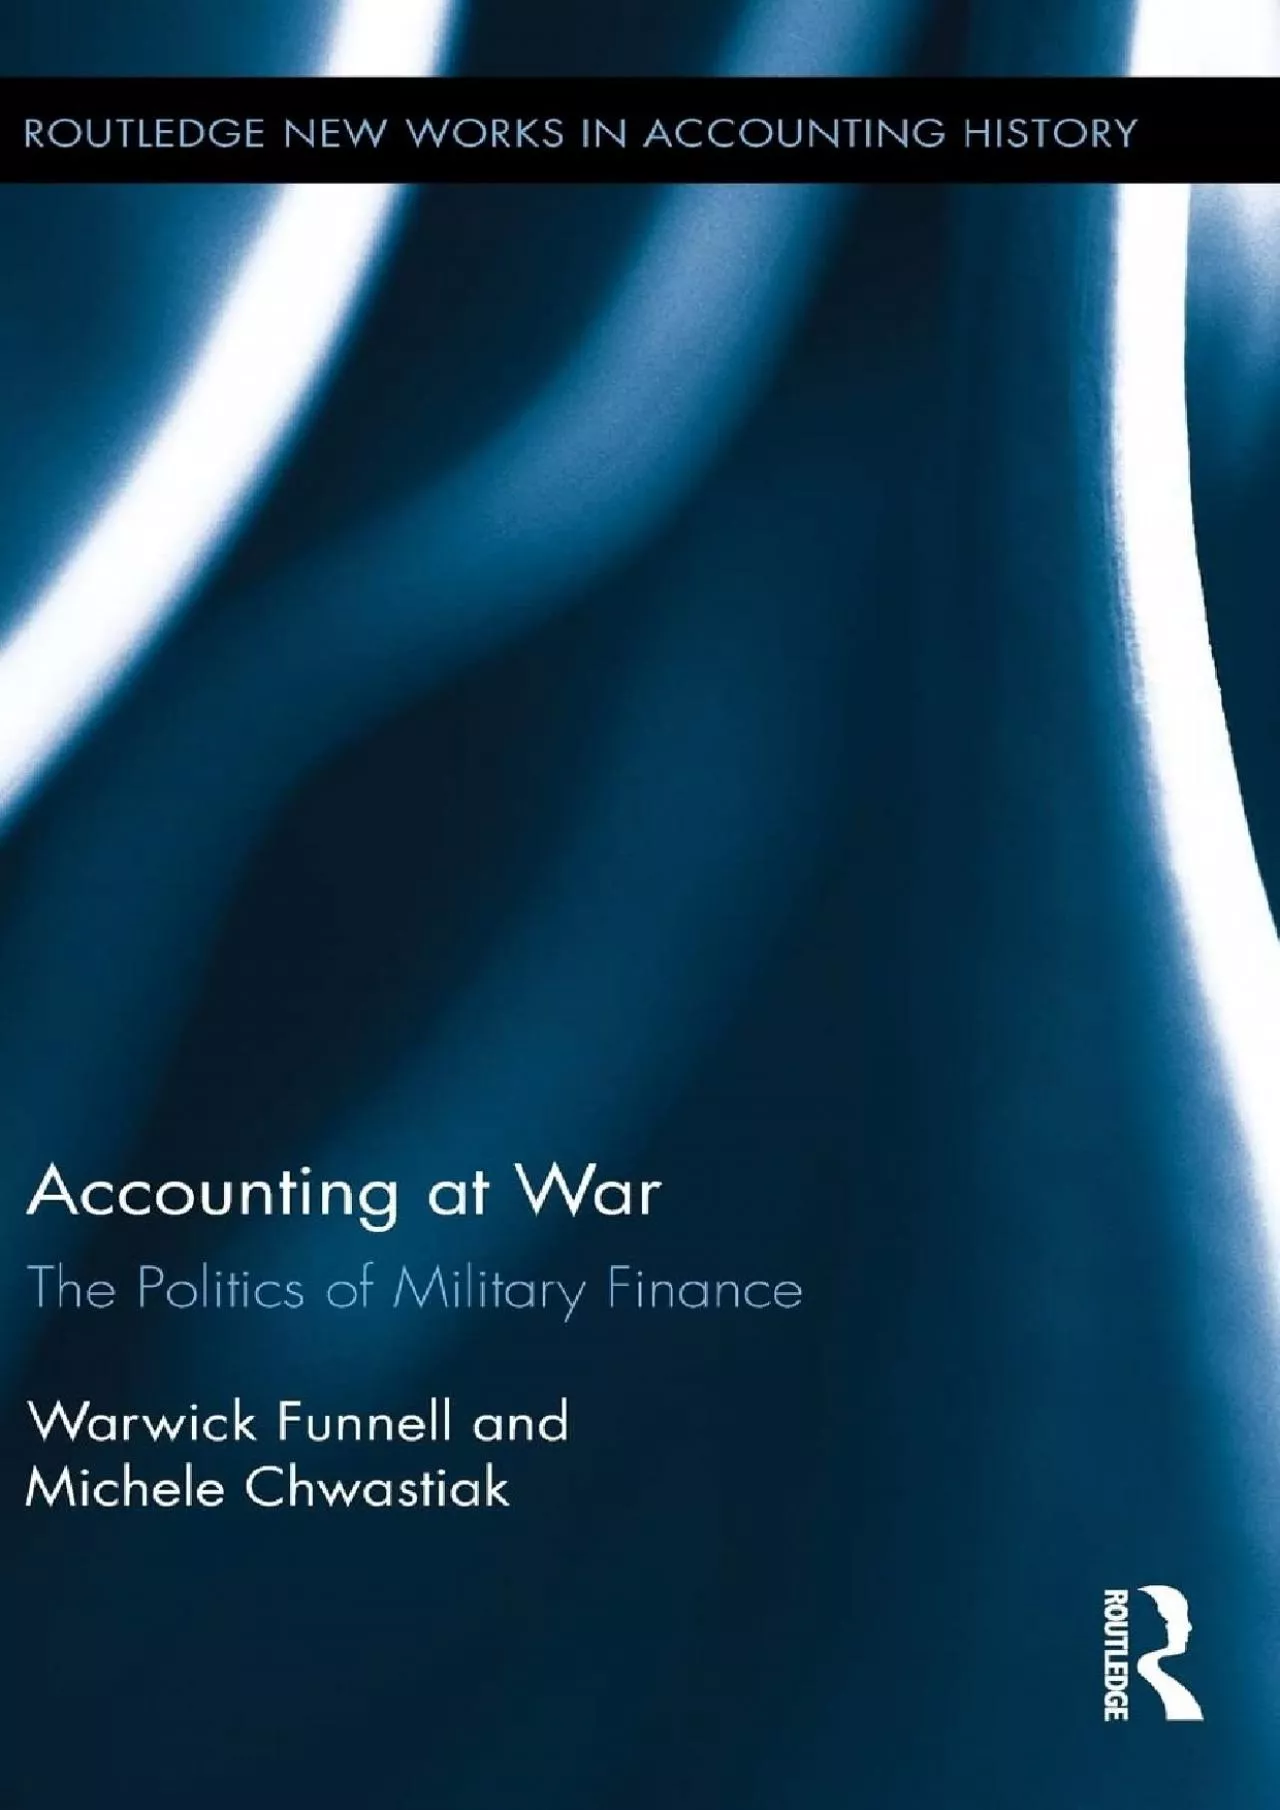 Accounting at War: The Politics of Military Finance (Routledge New Works in Accounting